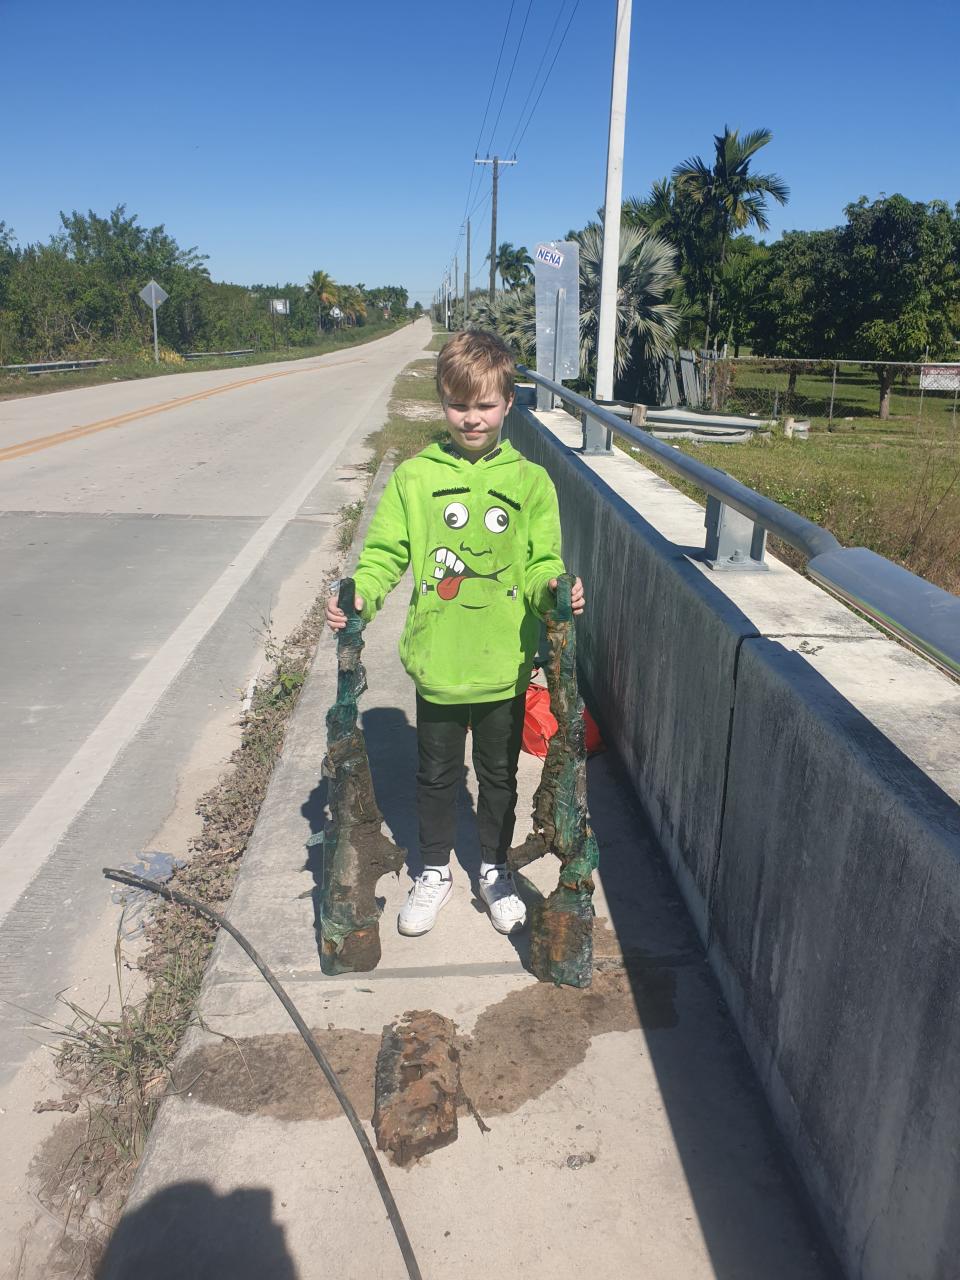 Allen Cadwalader, 11, holds the lower receivers of two .50-caliber sniper rifles he and his grandfather found in a Miami-Dade County canal Sunday, Jan. 30, 2022